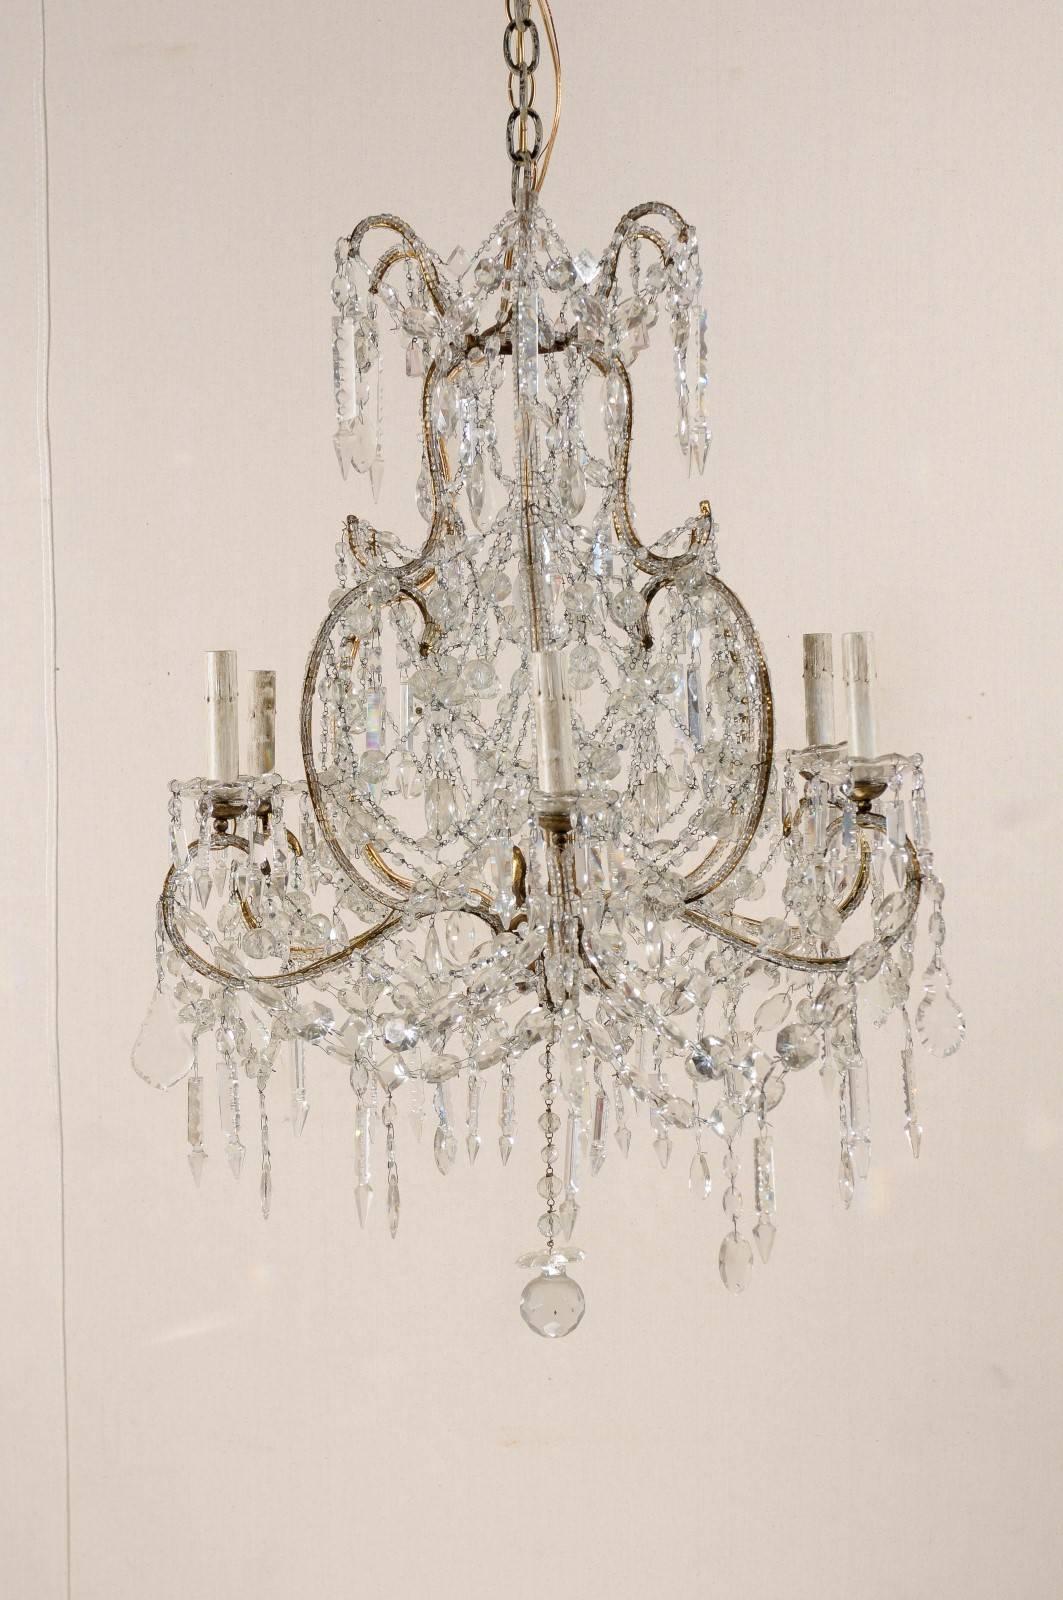 A French, early 20th century crystal six-light chandelier with scroll arms. This crystal chandelier features a nice variety of shaped crystals. It is also adorned with a Classic round finial at the bottom. The various scrolls making the armature of